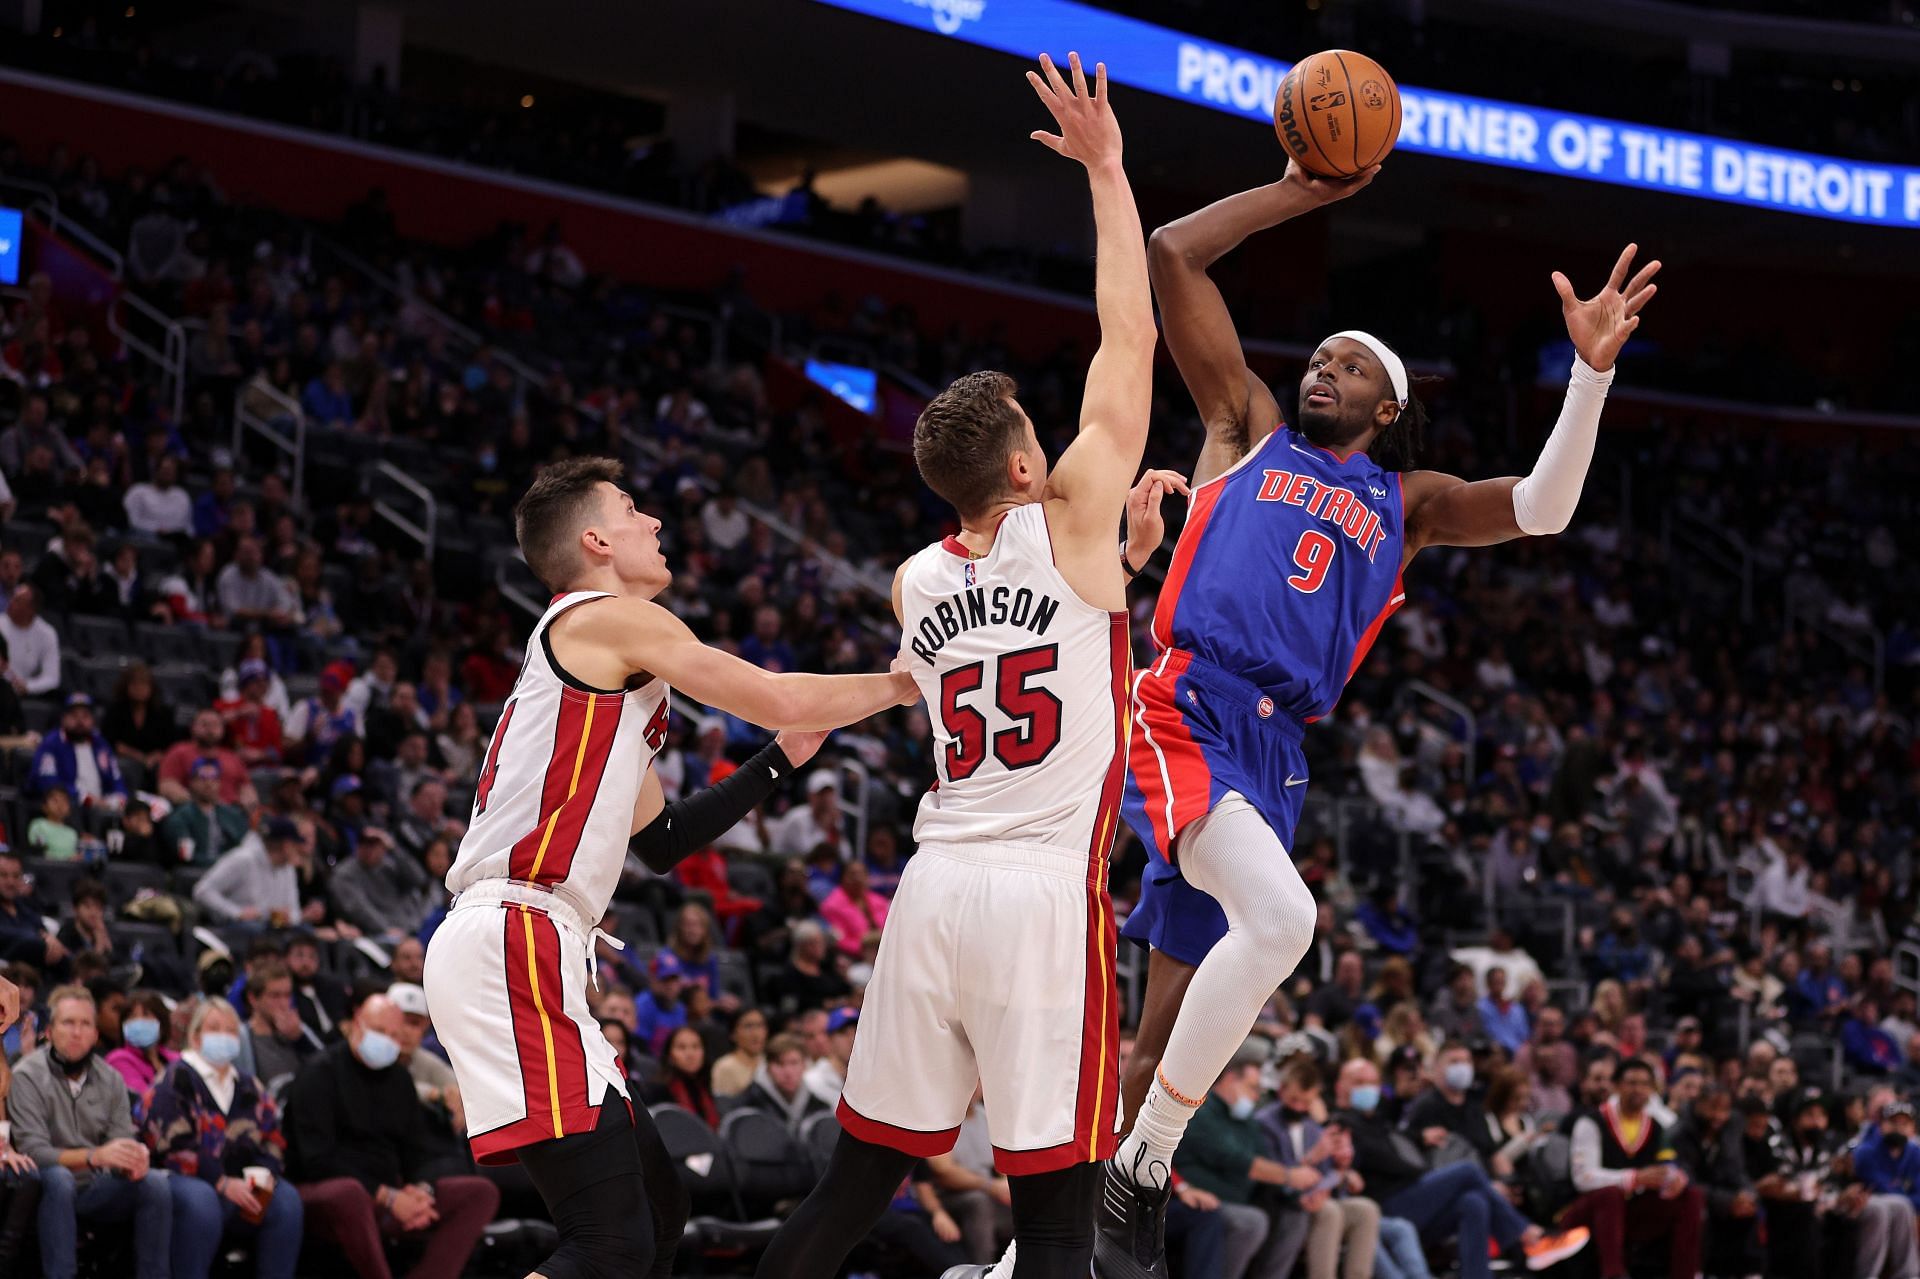 Jerami Grant #9 of the Detroit Pistons tries to get a shot off over Duncan Robinson #55 and Tyler Herro #14 of the Miami Heat